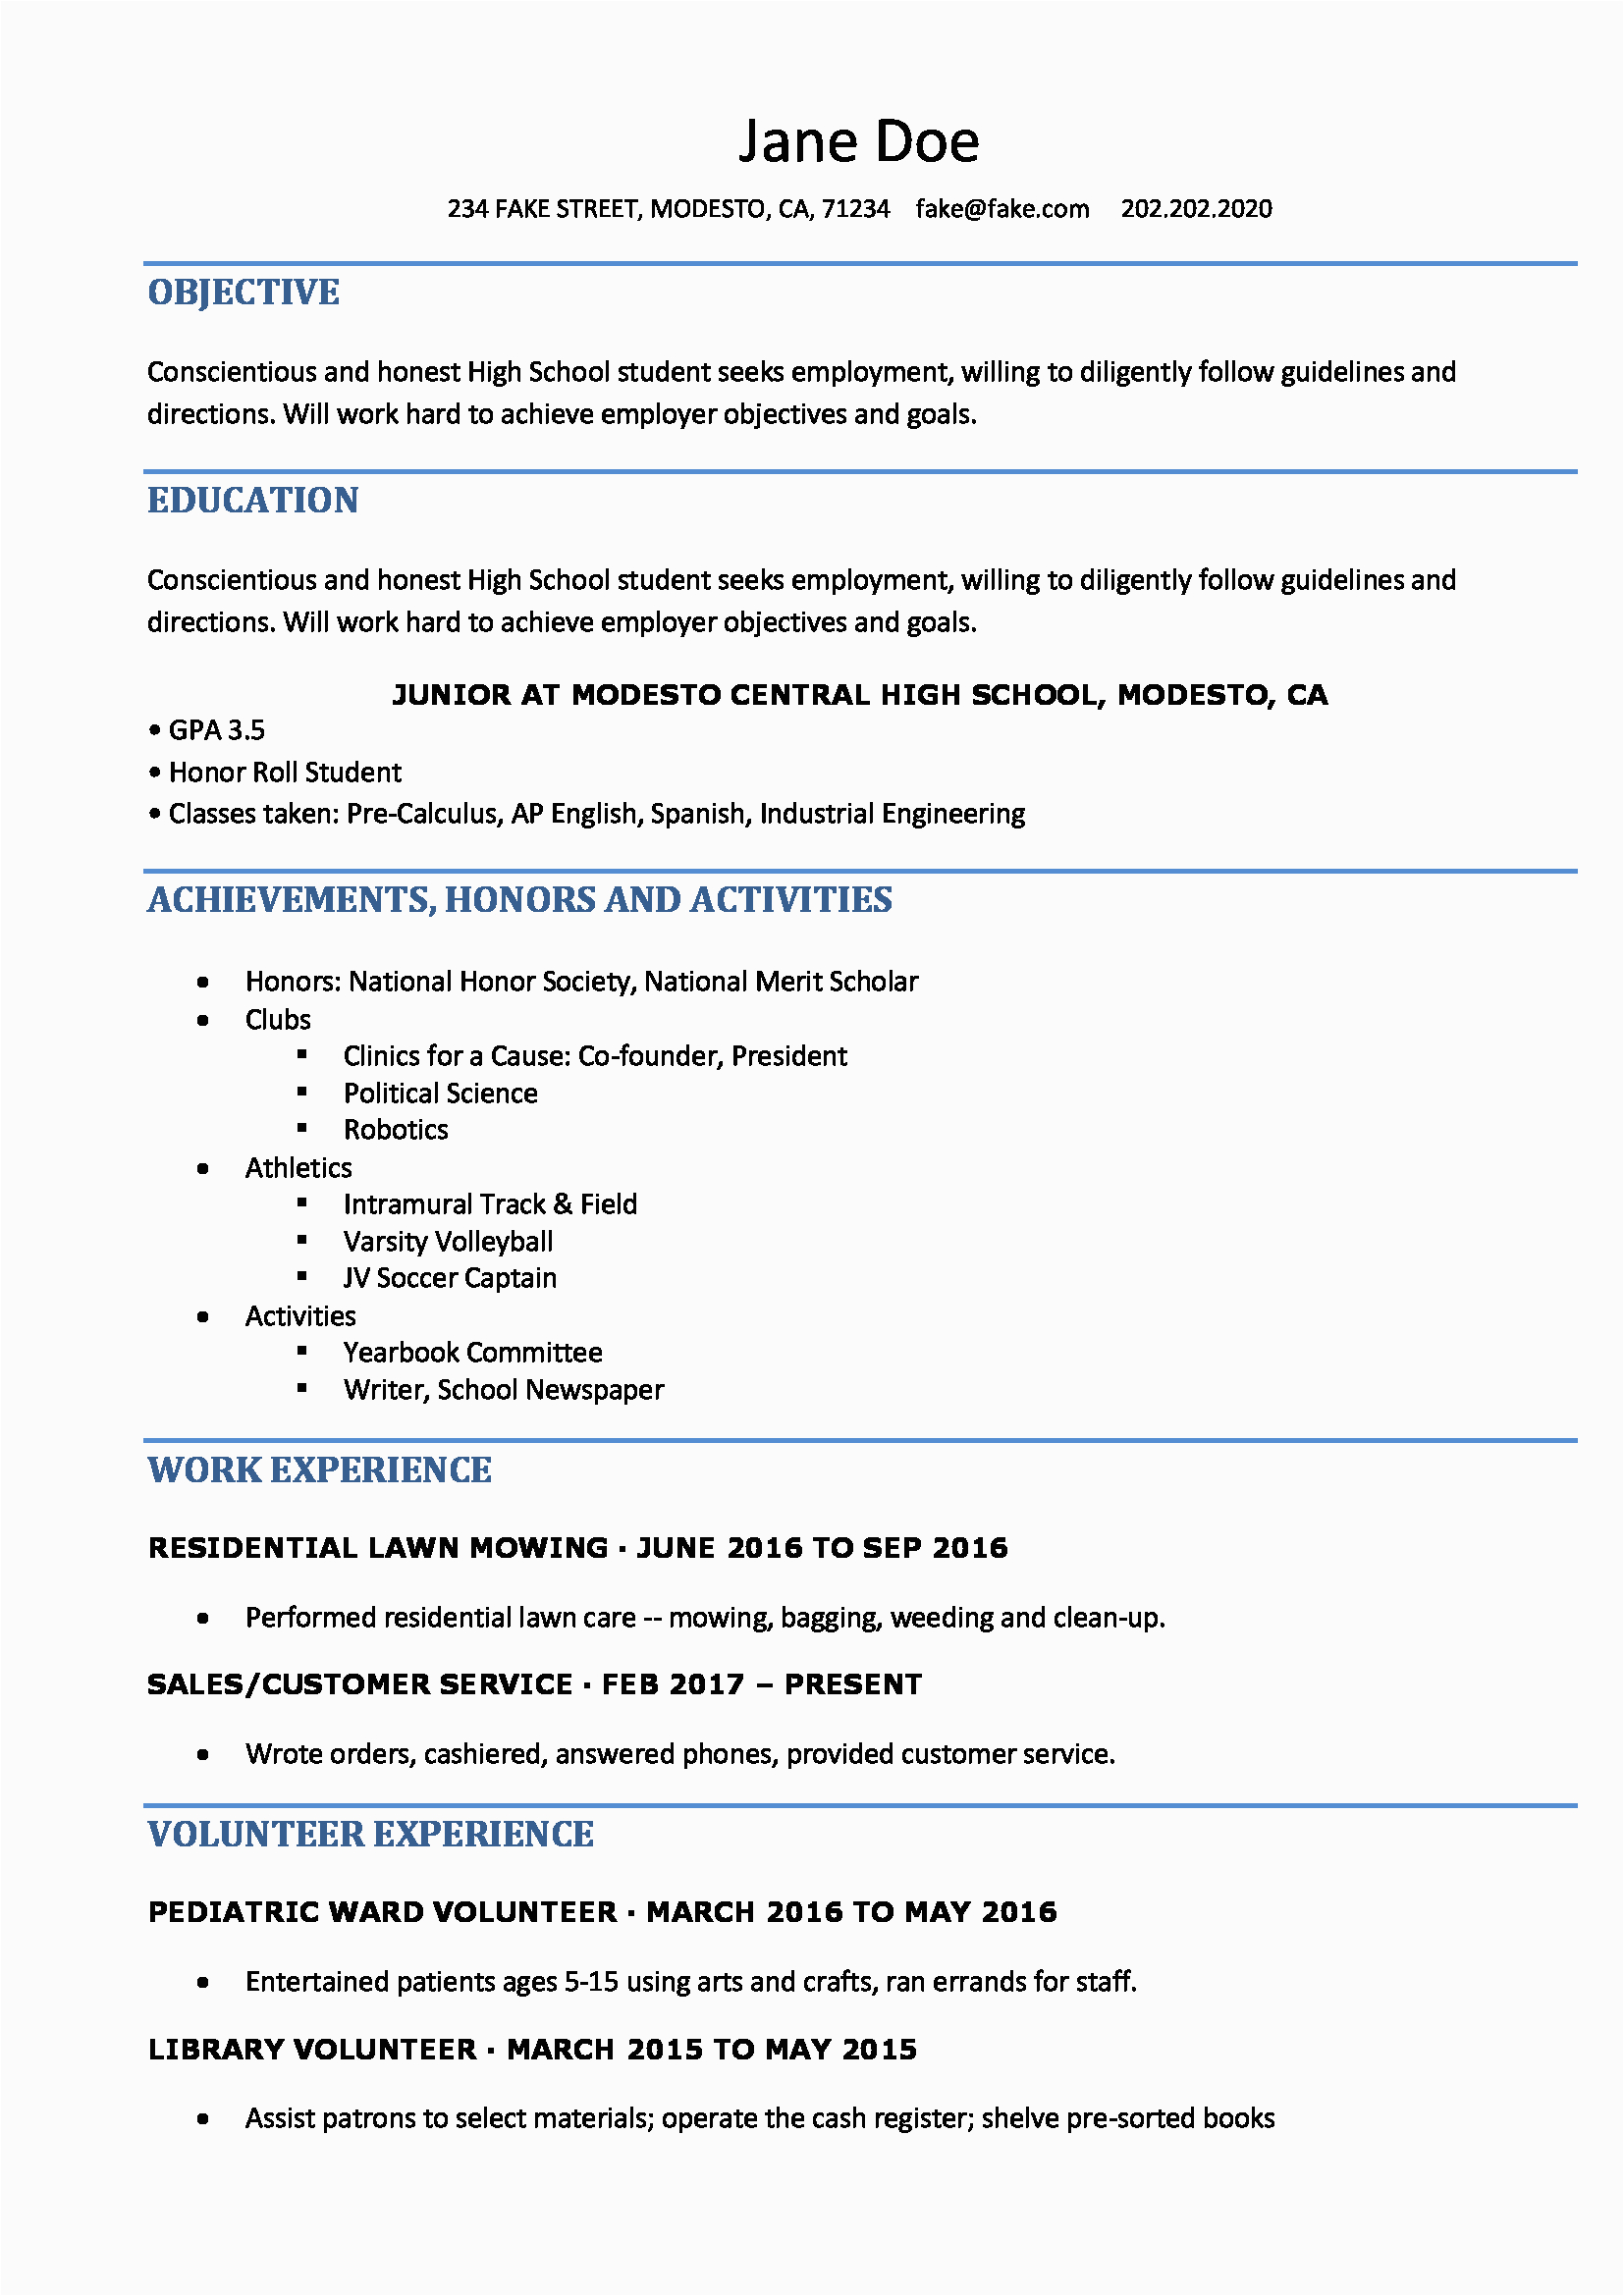 Sample Resume Objective Statements for High School Students High School Resume Resume Templates for High School